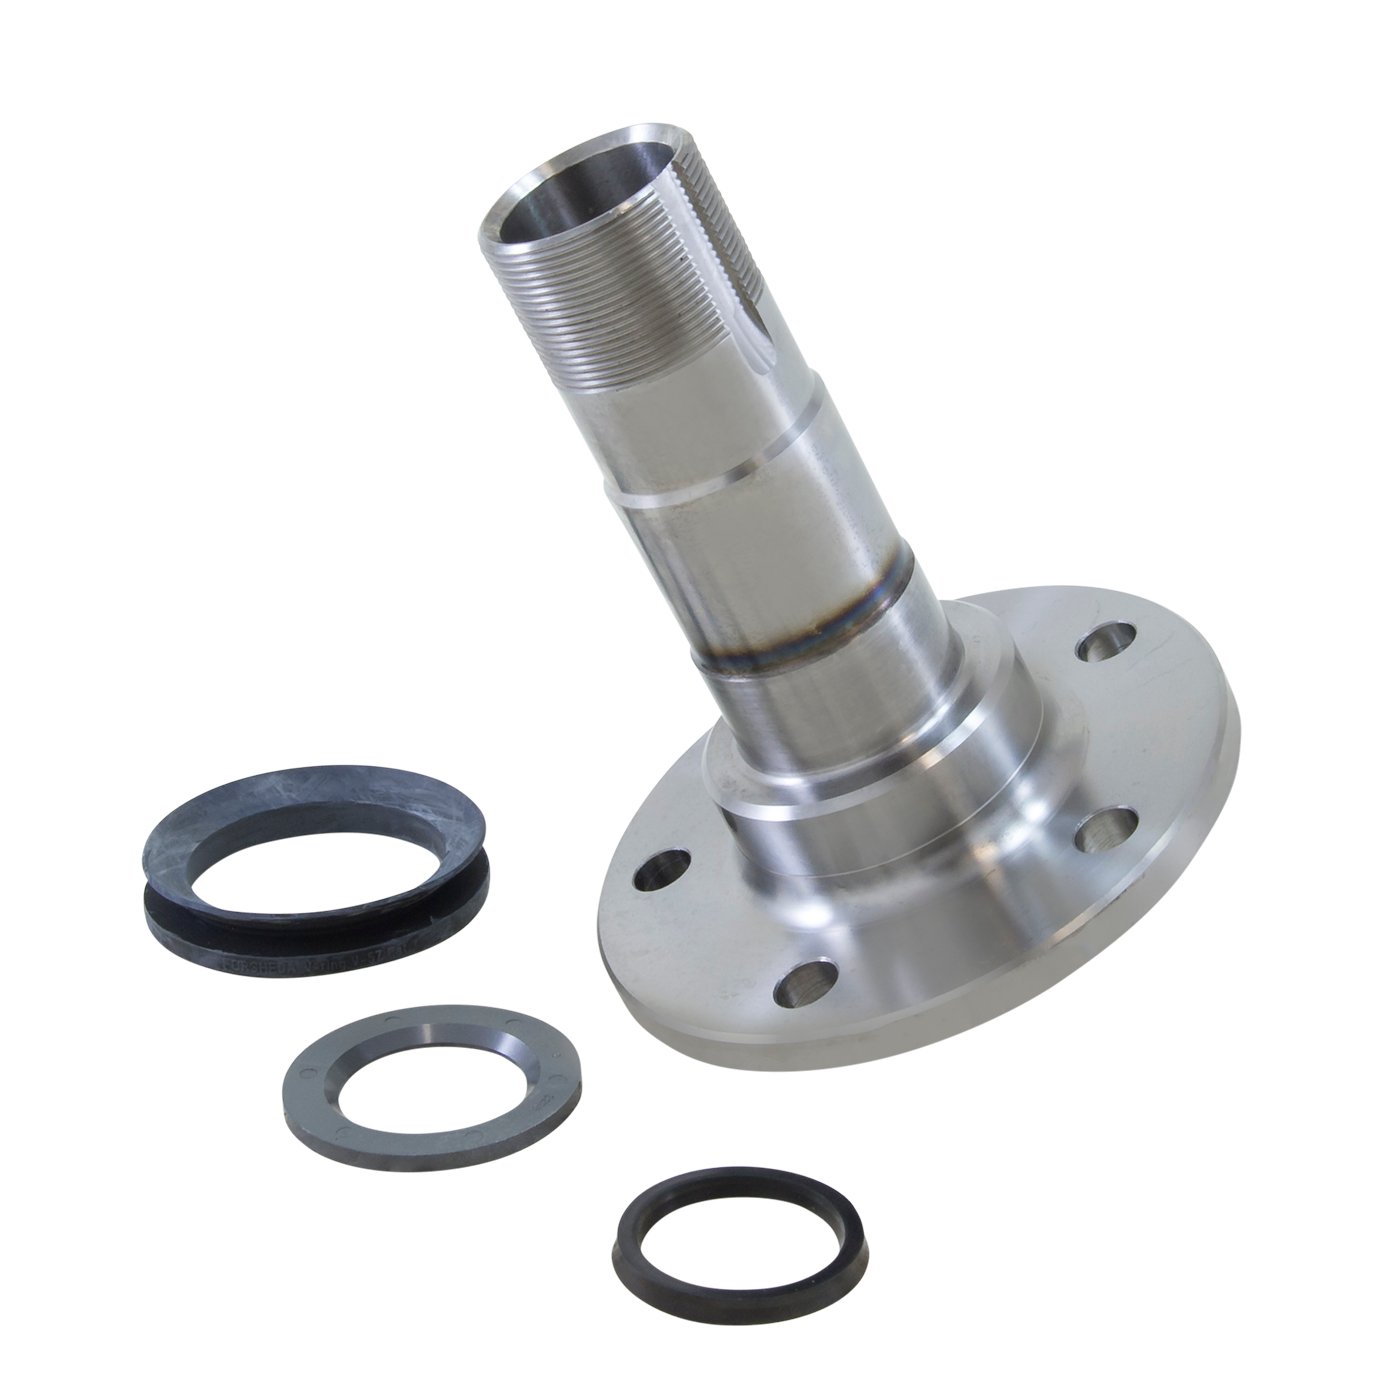 Replacement Front Spindle For Dana 44 Ifs, 93 & Up Non Abs.